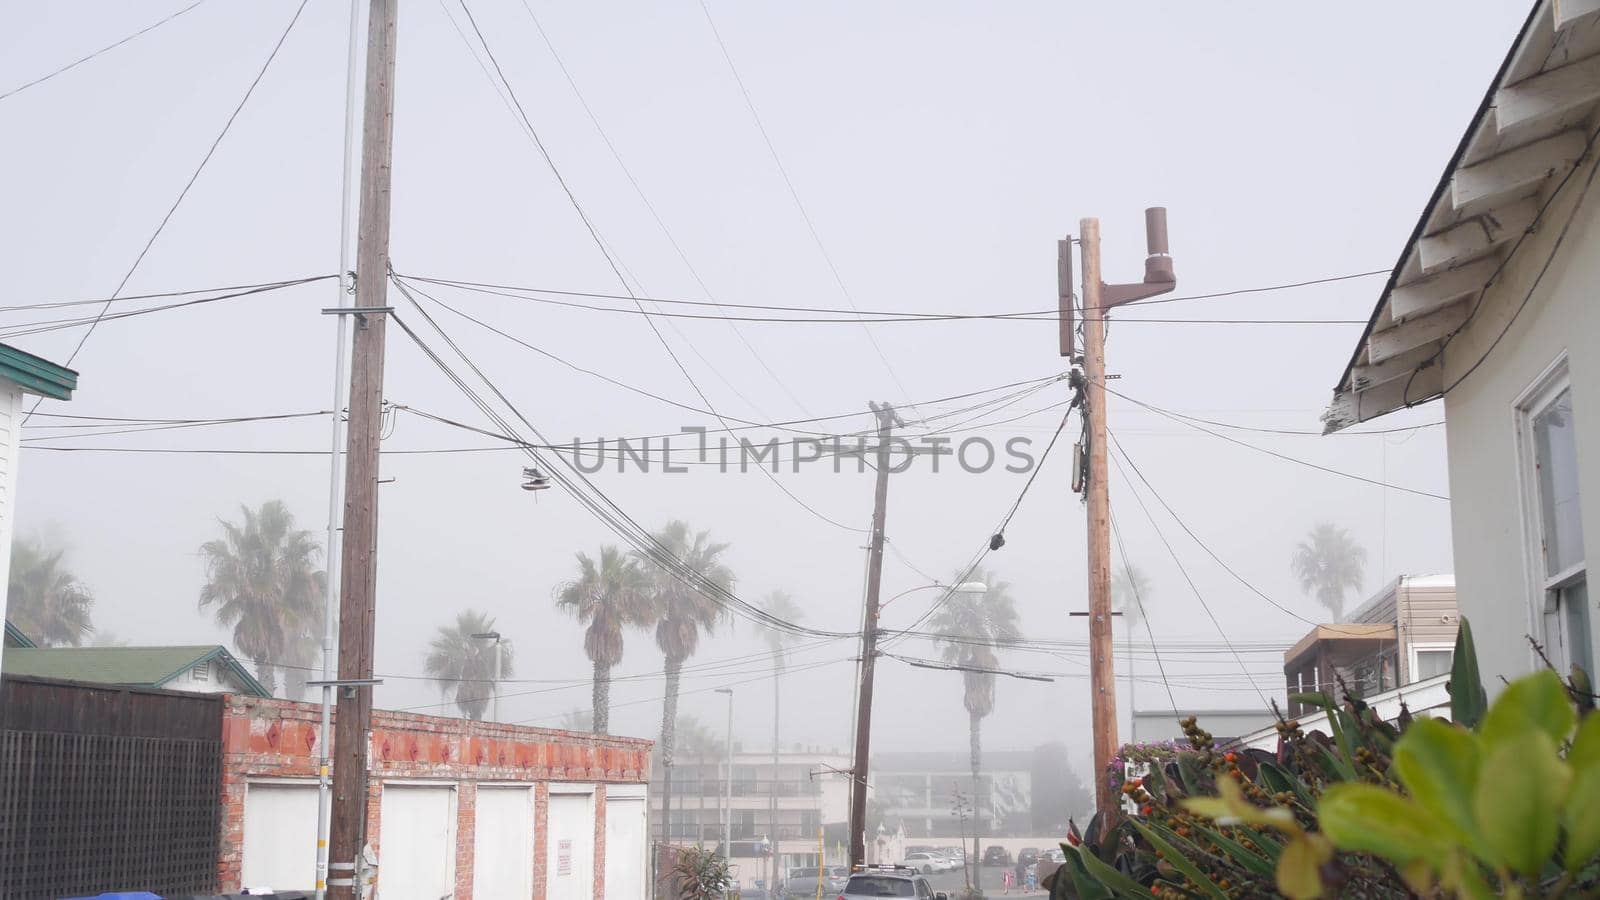 Power lines or wires on poles, foggy city street, California, USA. Cables on high voltage wooden electricity posts or pylons in misty San Diego. Power supply and houses in America. Cloudy weather.